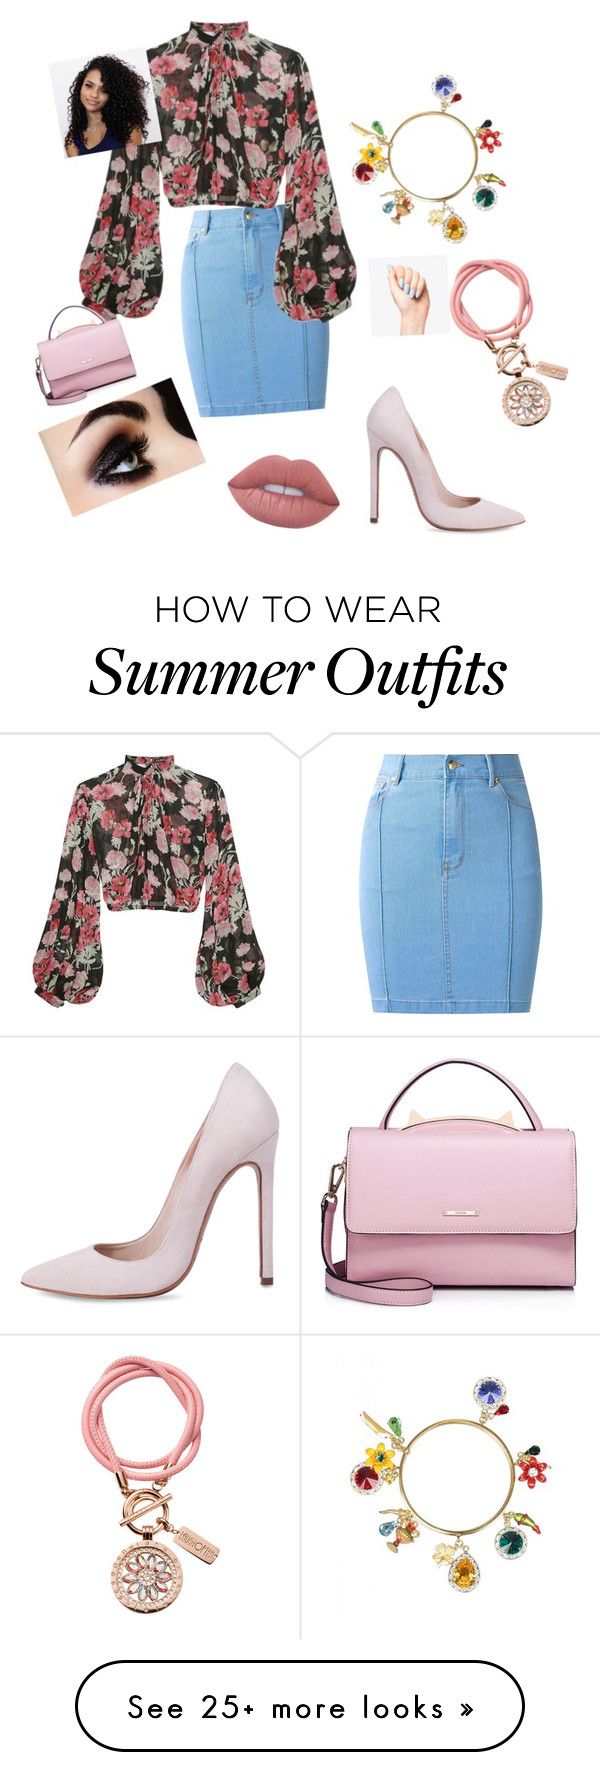 "Yara shahidi inspired spring outfit" by damaria-mable on Polyvore fea...